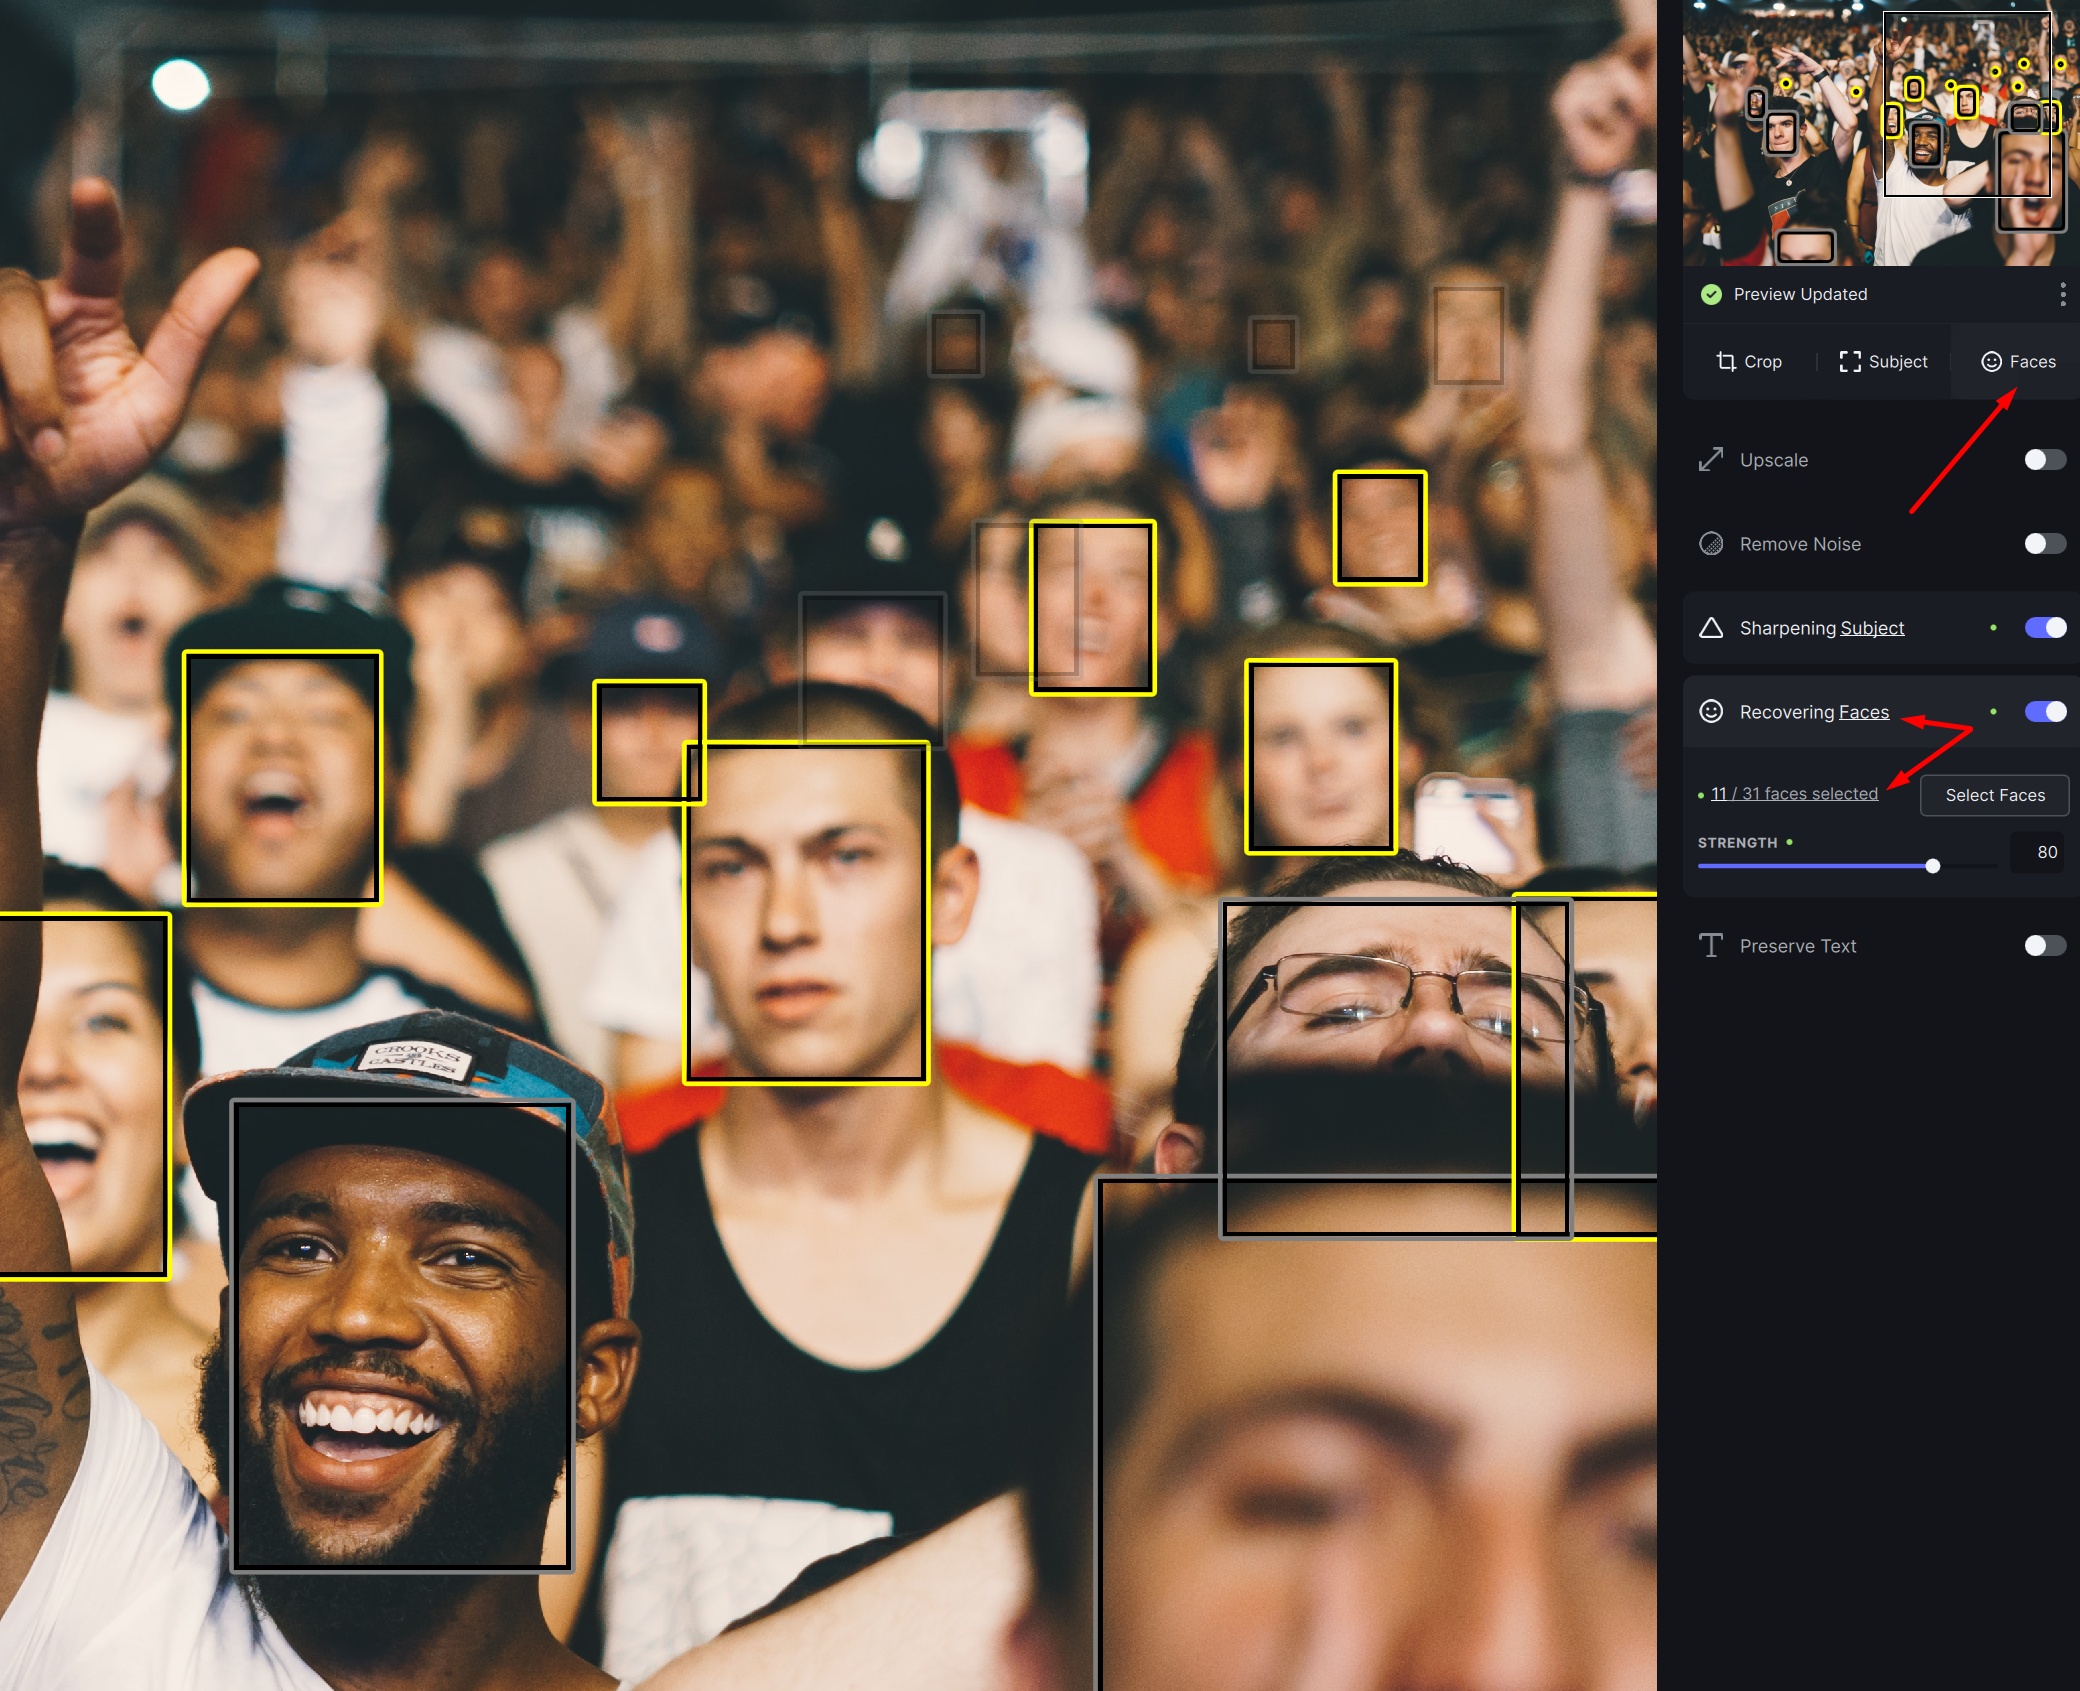 View Detected Faces